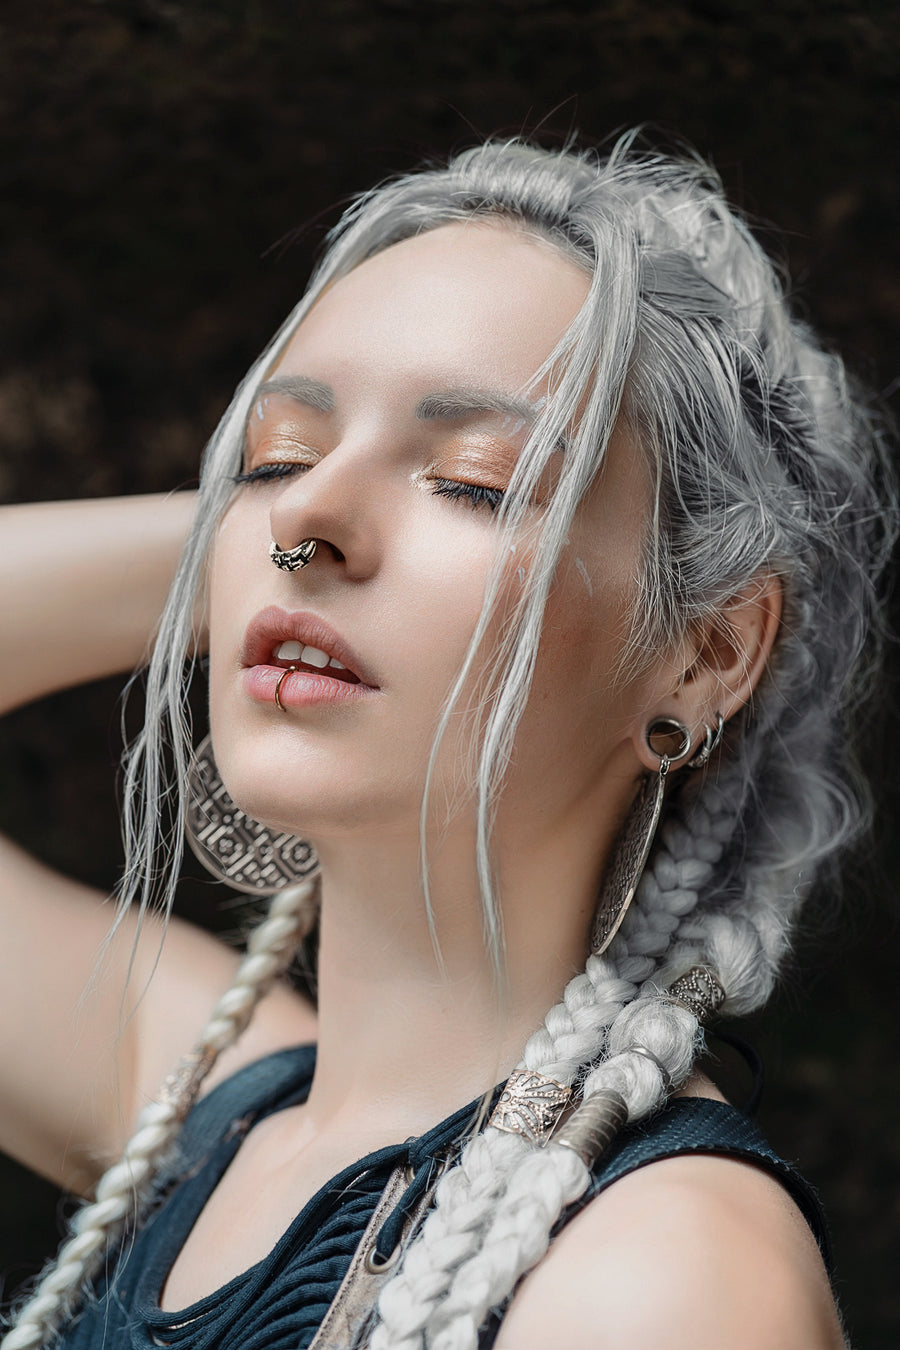 Woman in a contemplative pose displaying her silver septum ring, accentuating her unique style with braided hair and tribal earrings.